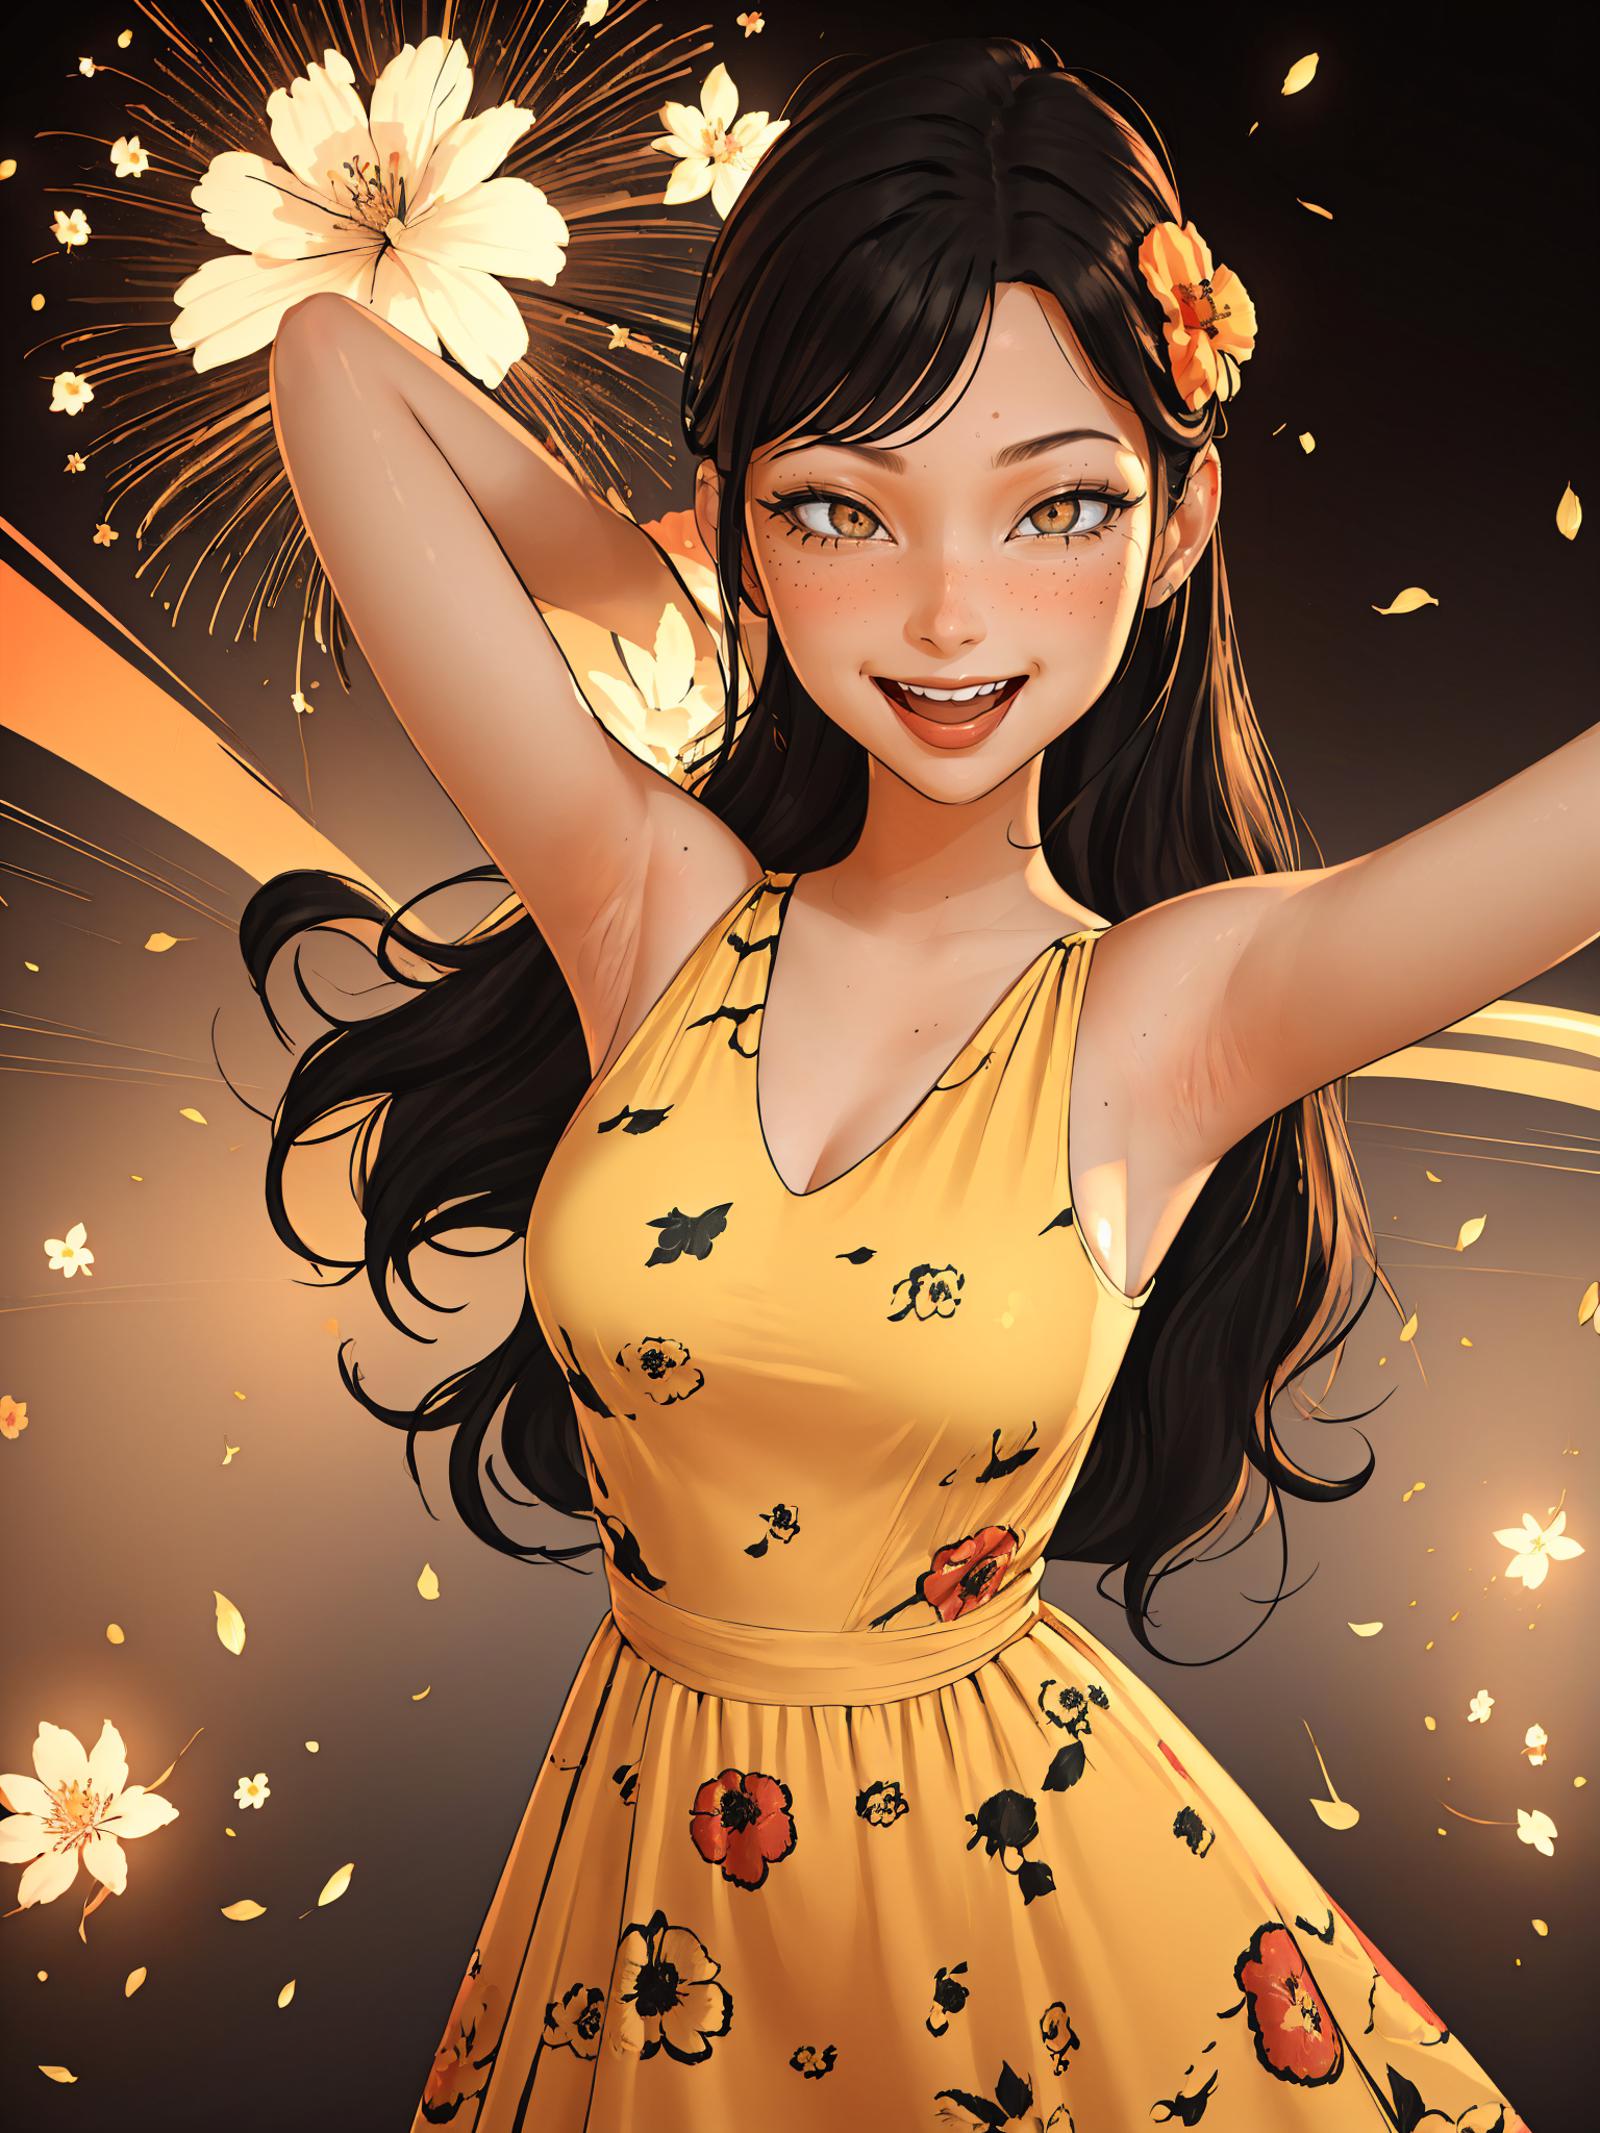 A beautiful young woman wearing a yellow dress with red flowers, smiling and looking at the camera.